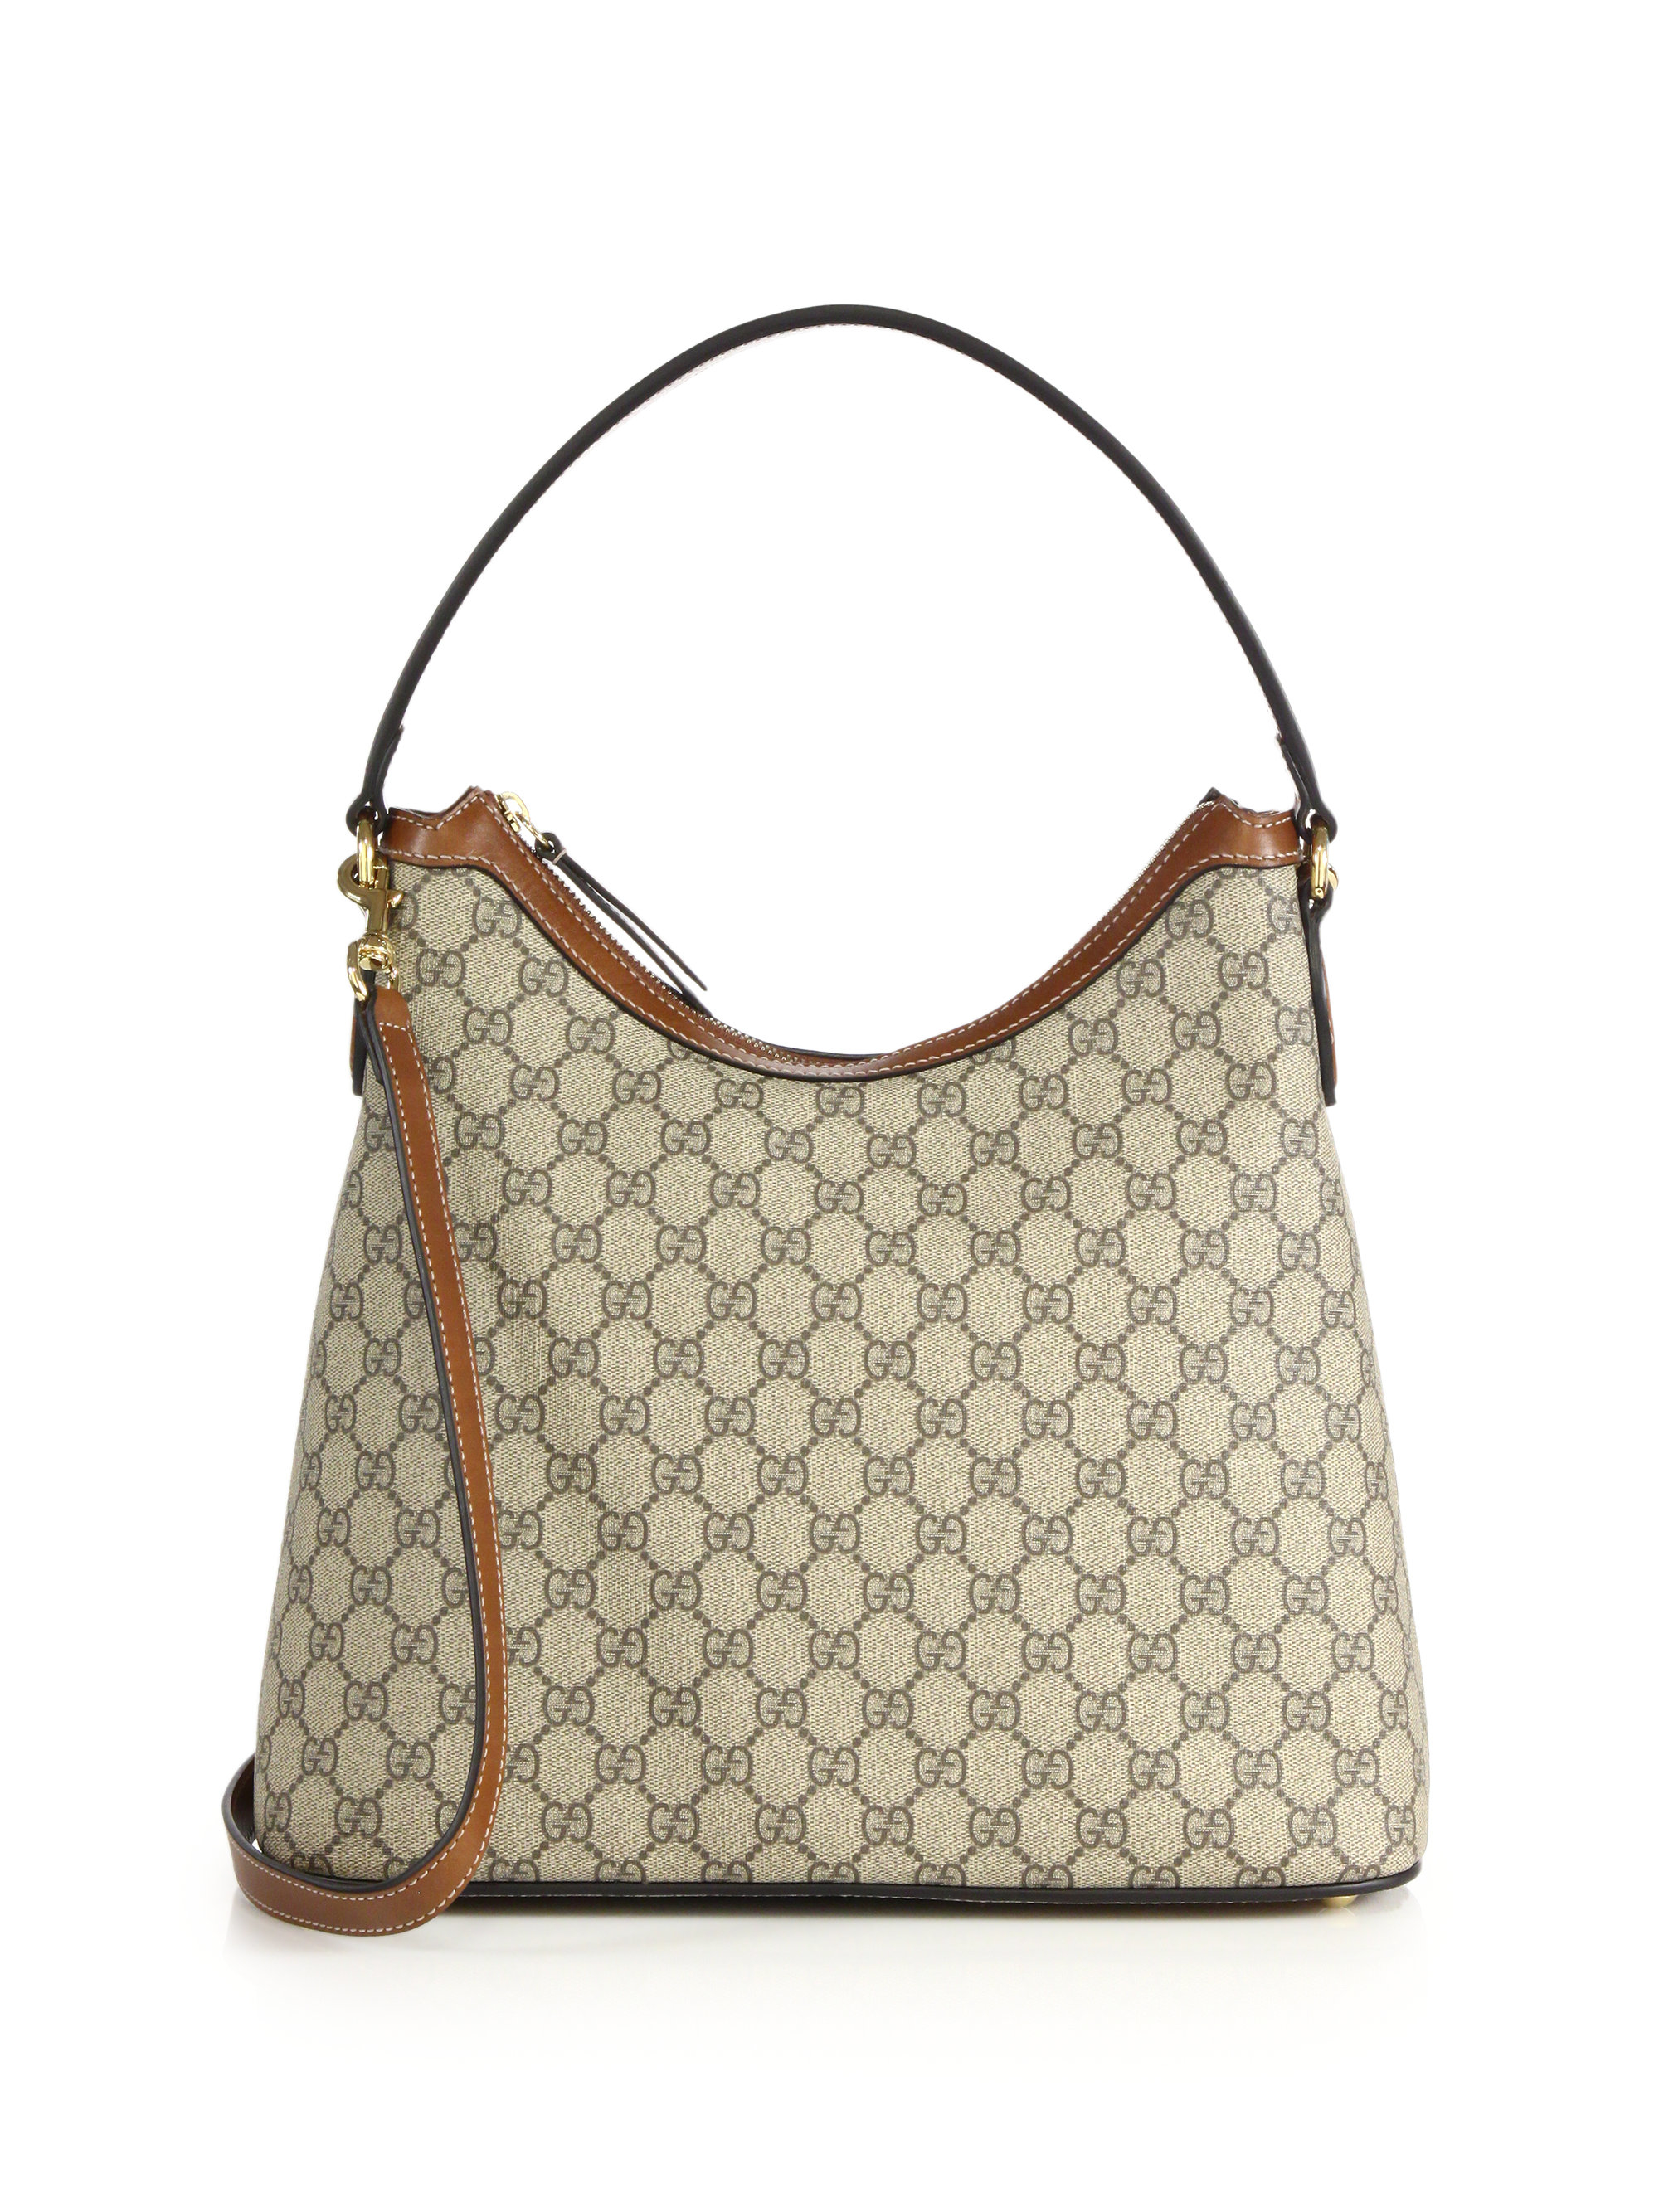 Lyst - Gucci GG Supreme Large Canvas Hobo Bag in Gray